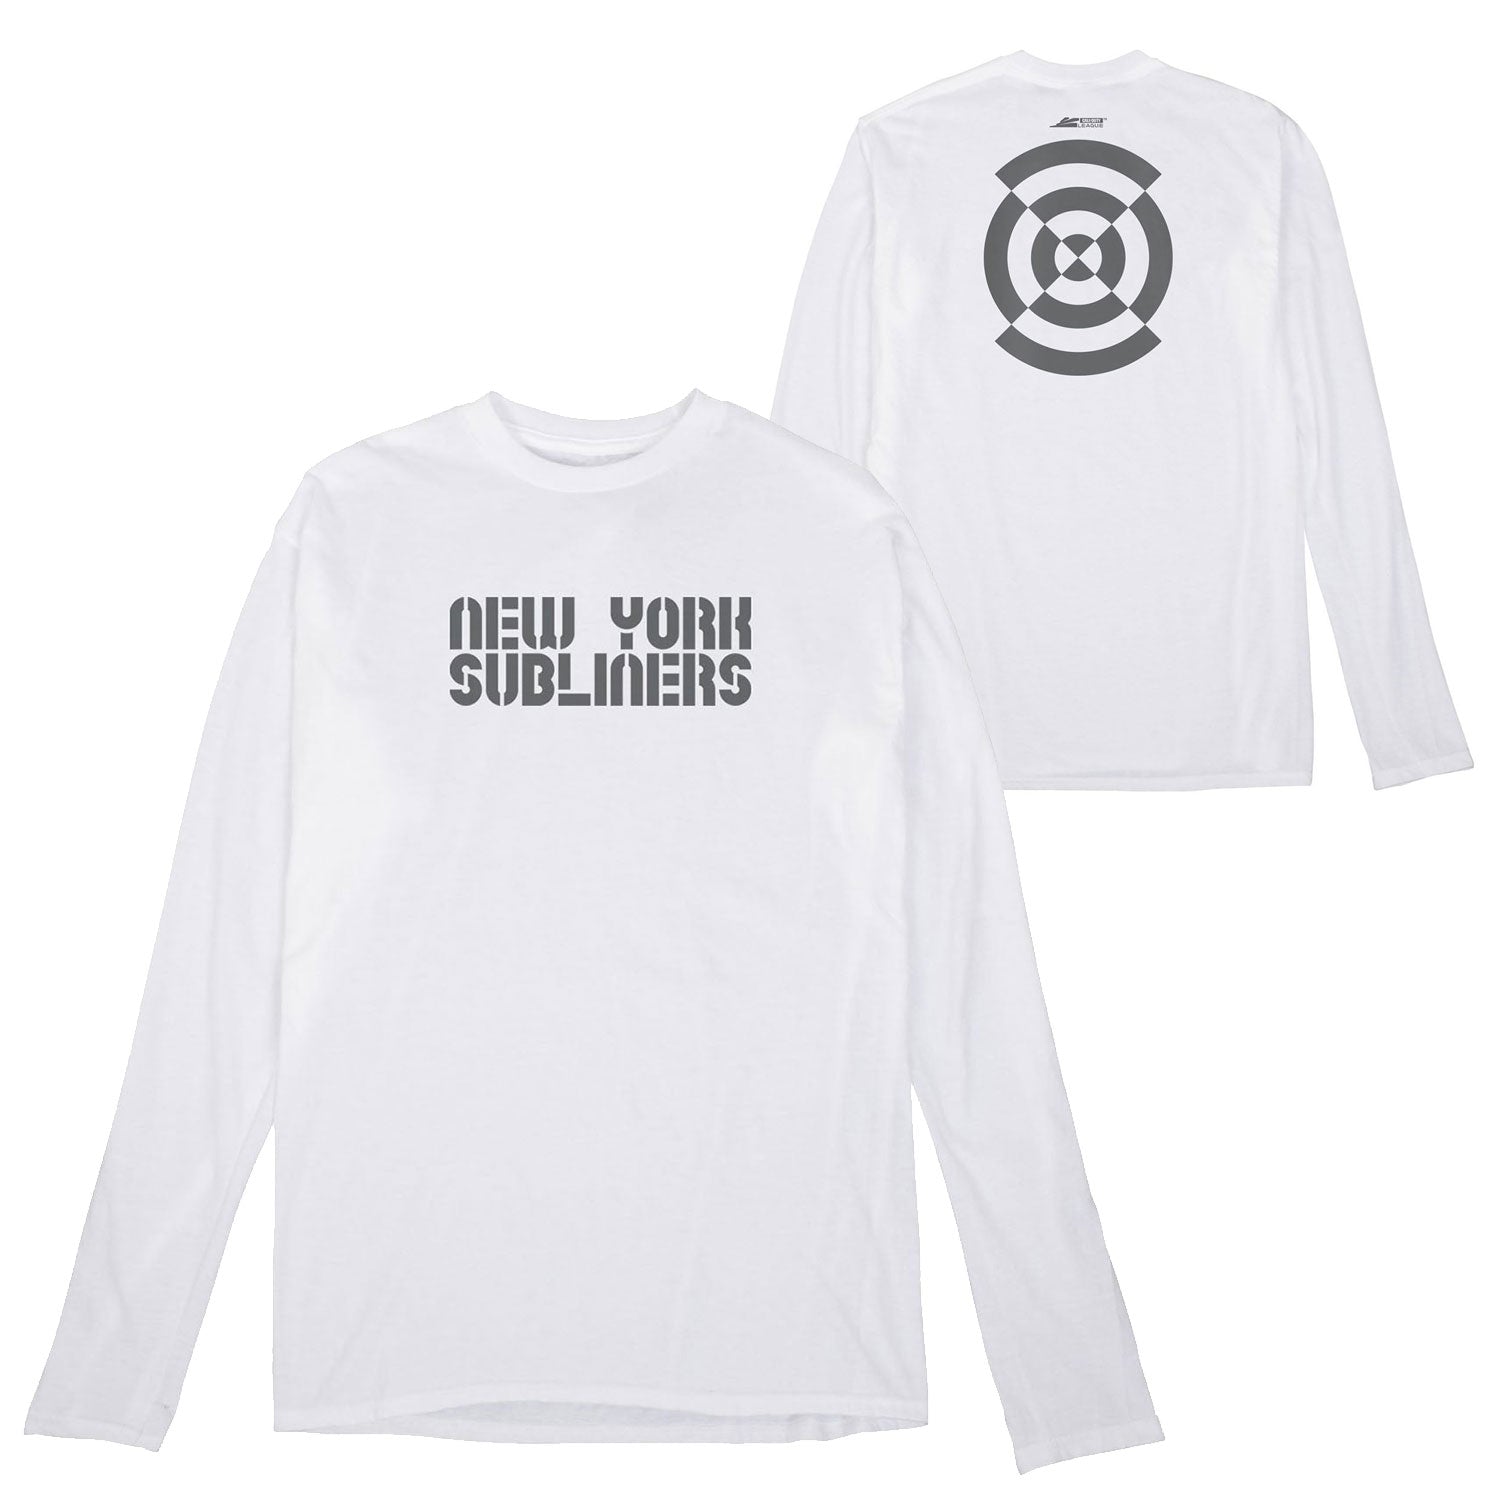 New York Subliners Signature Logo White Long Sleeve T-Shirt - front and back views